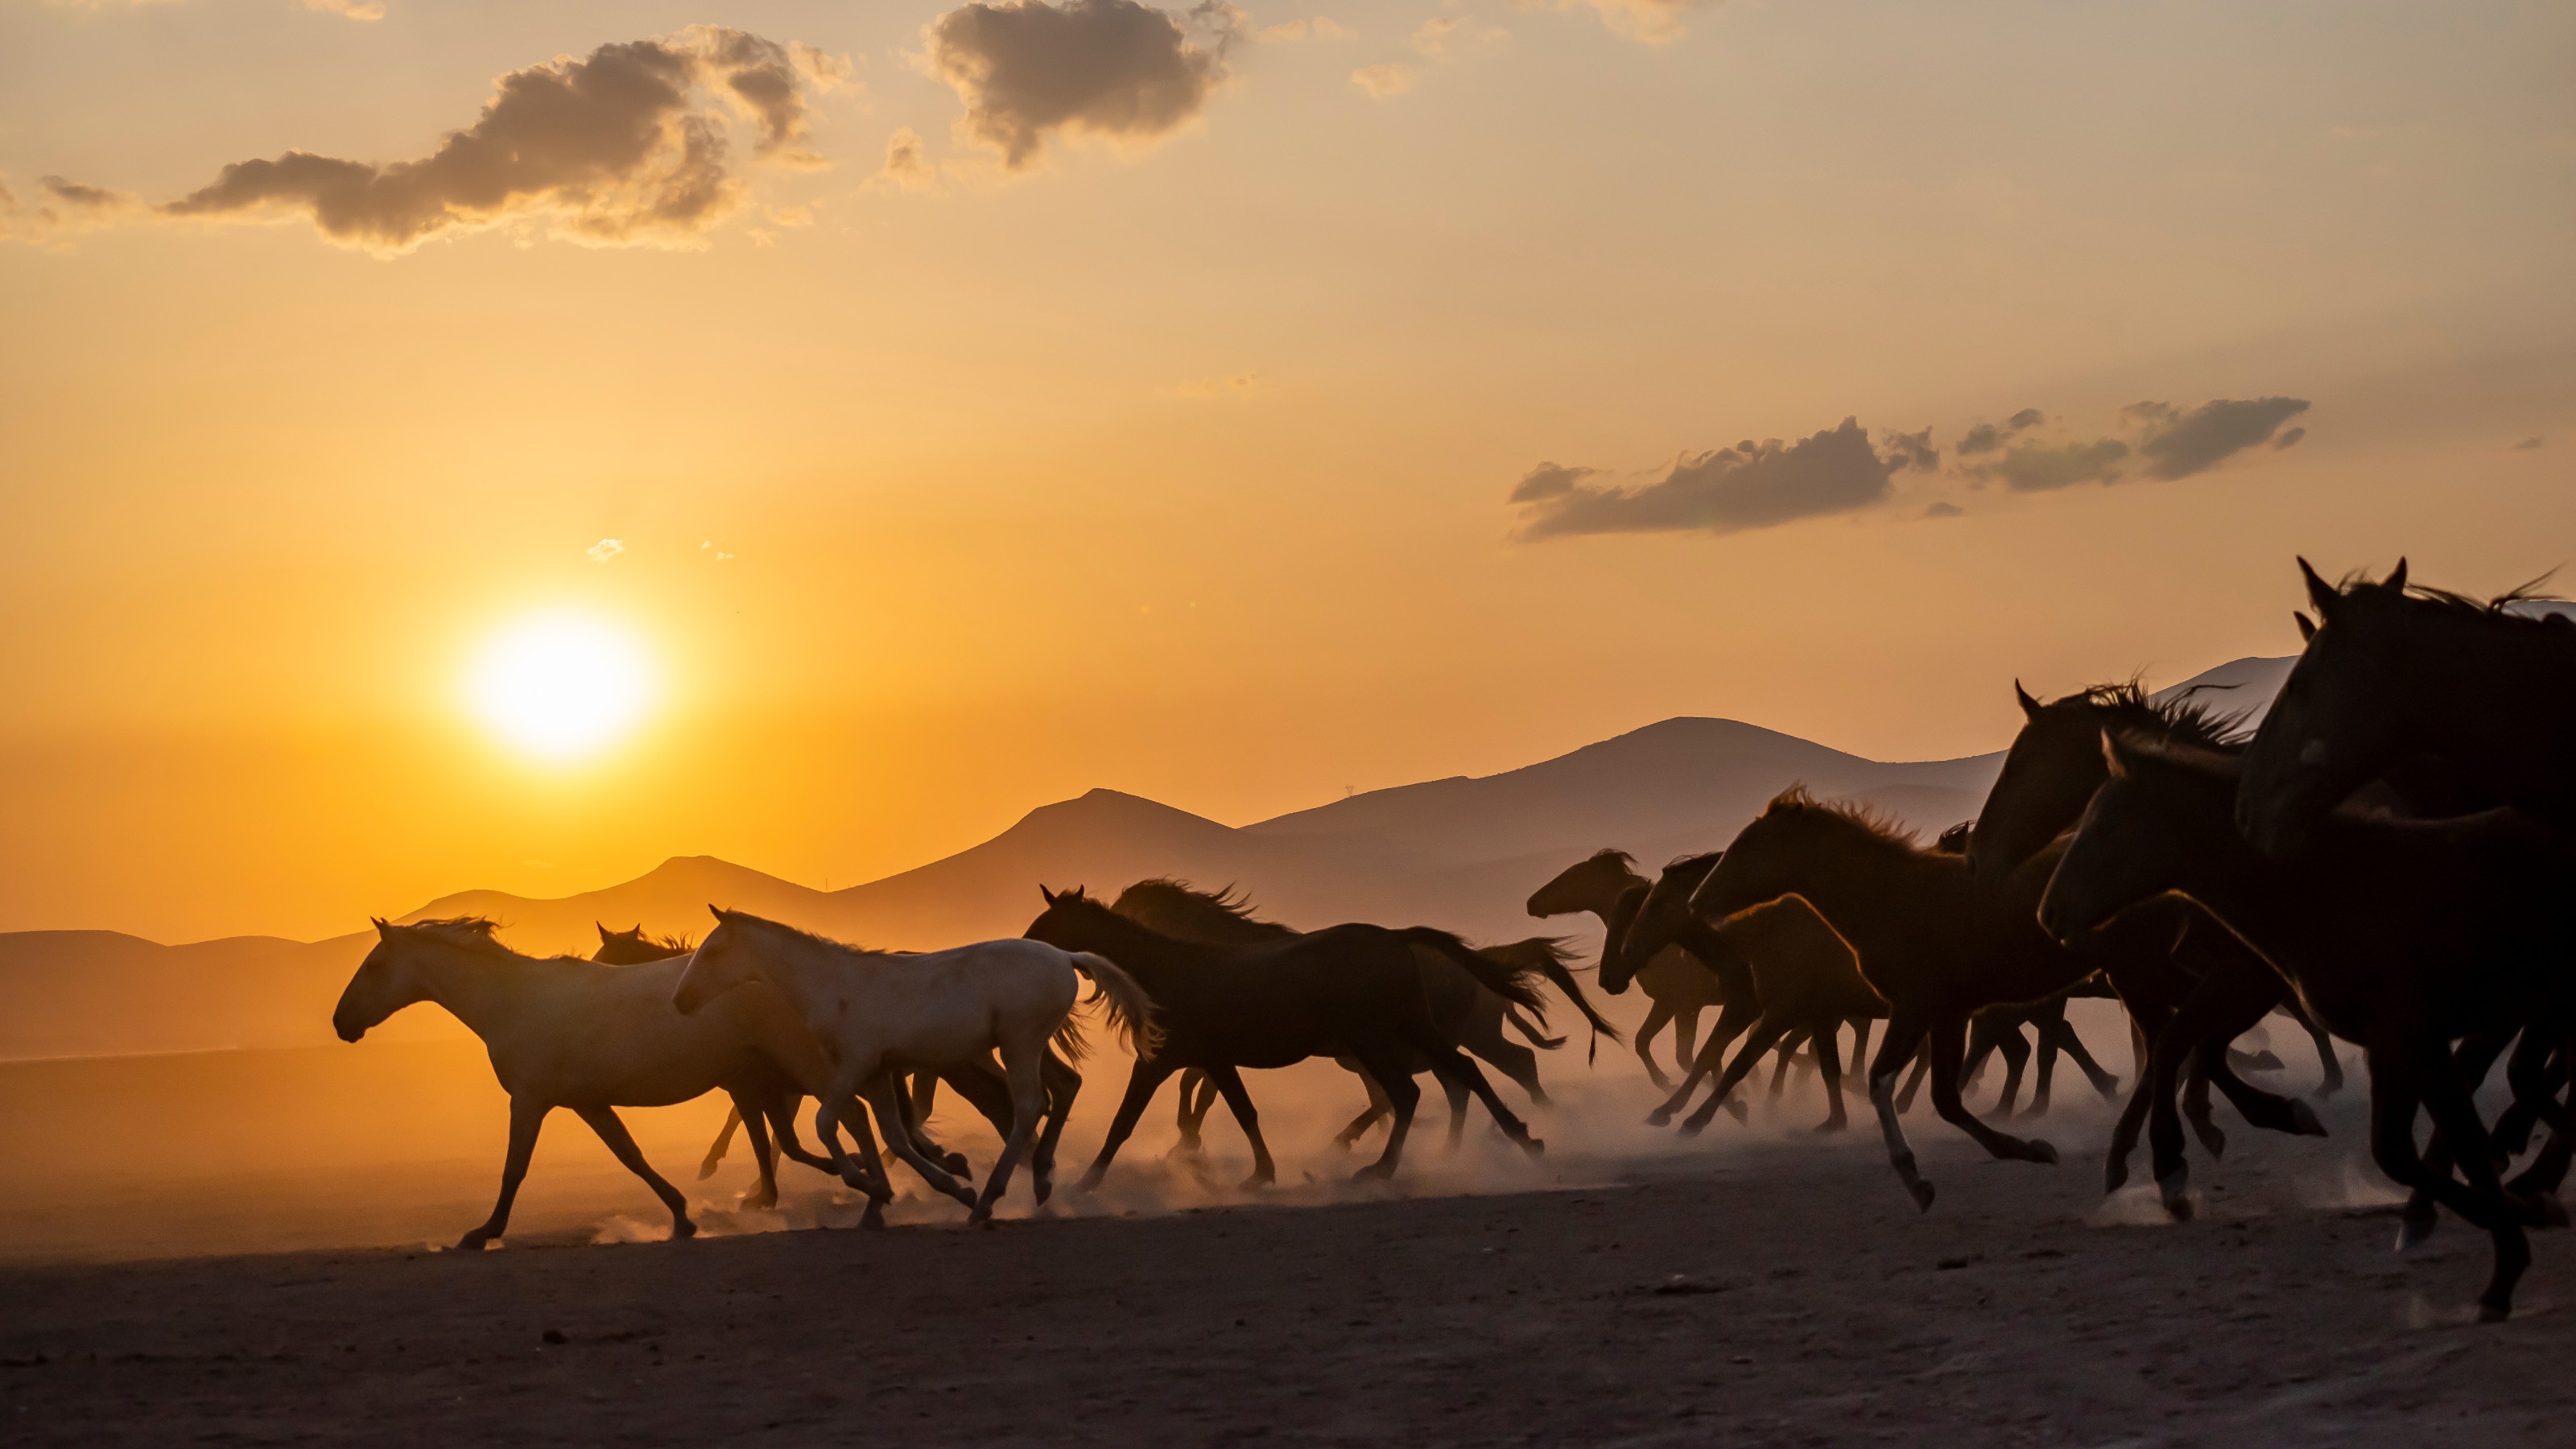  Horses running in a field at sunset with the sun rising behind them with text Isotopic strontium analysis of horses in Baltic Horse Sacrifice Ritual.